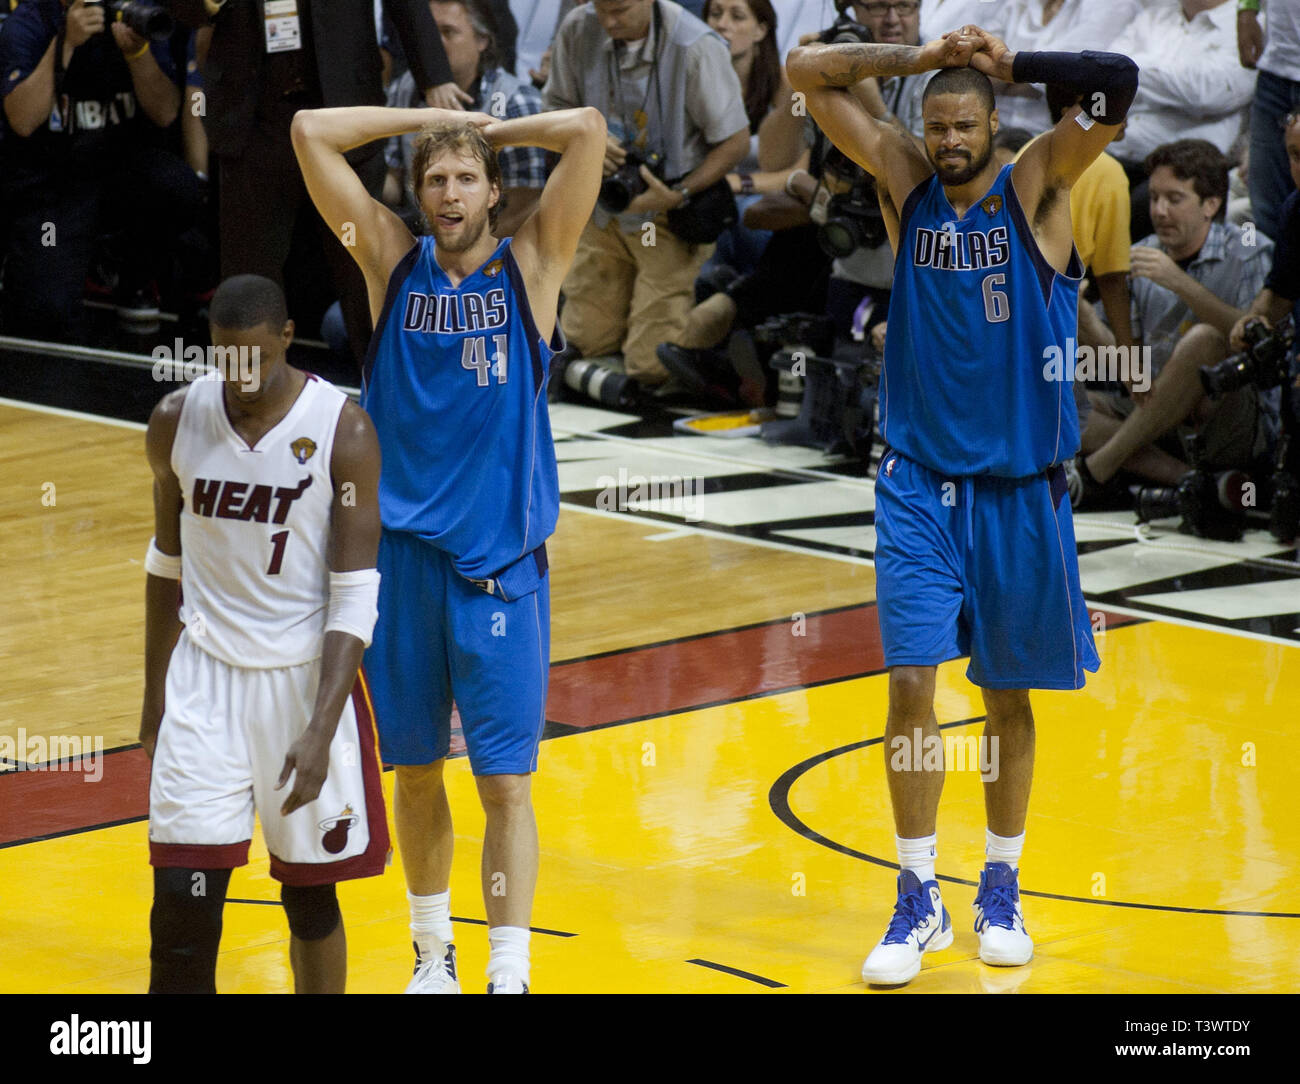 Miami, FLORIDA, USA. 12th June, 2011. Dallas Mavericks' Dirk Nowitzki (L)  celebrates with teammate Tyson Chandler near the end of Game 6 of the NBA  Finals basketball series against the Miami Heat